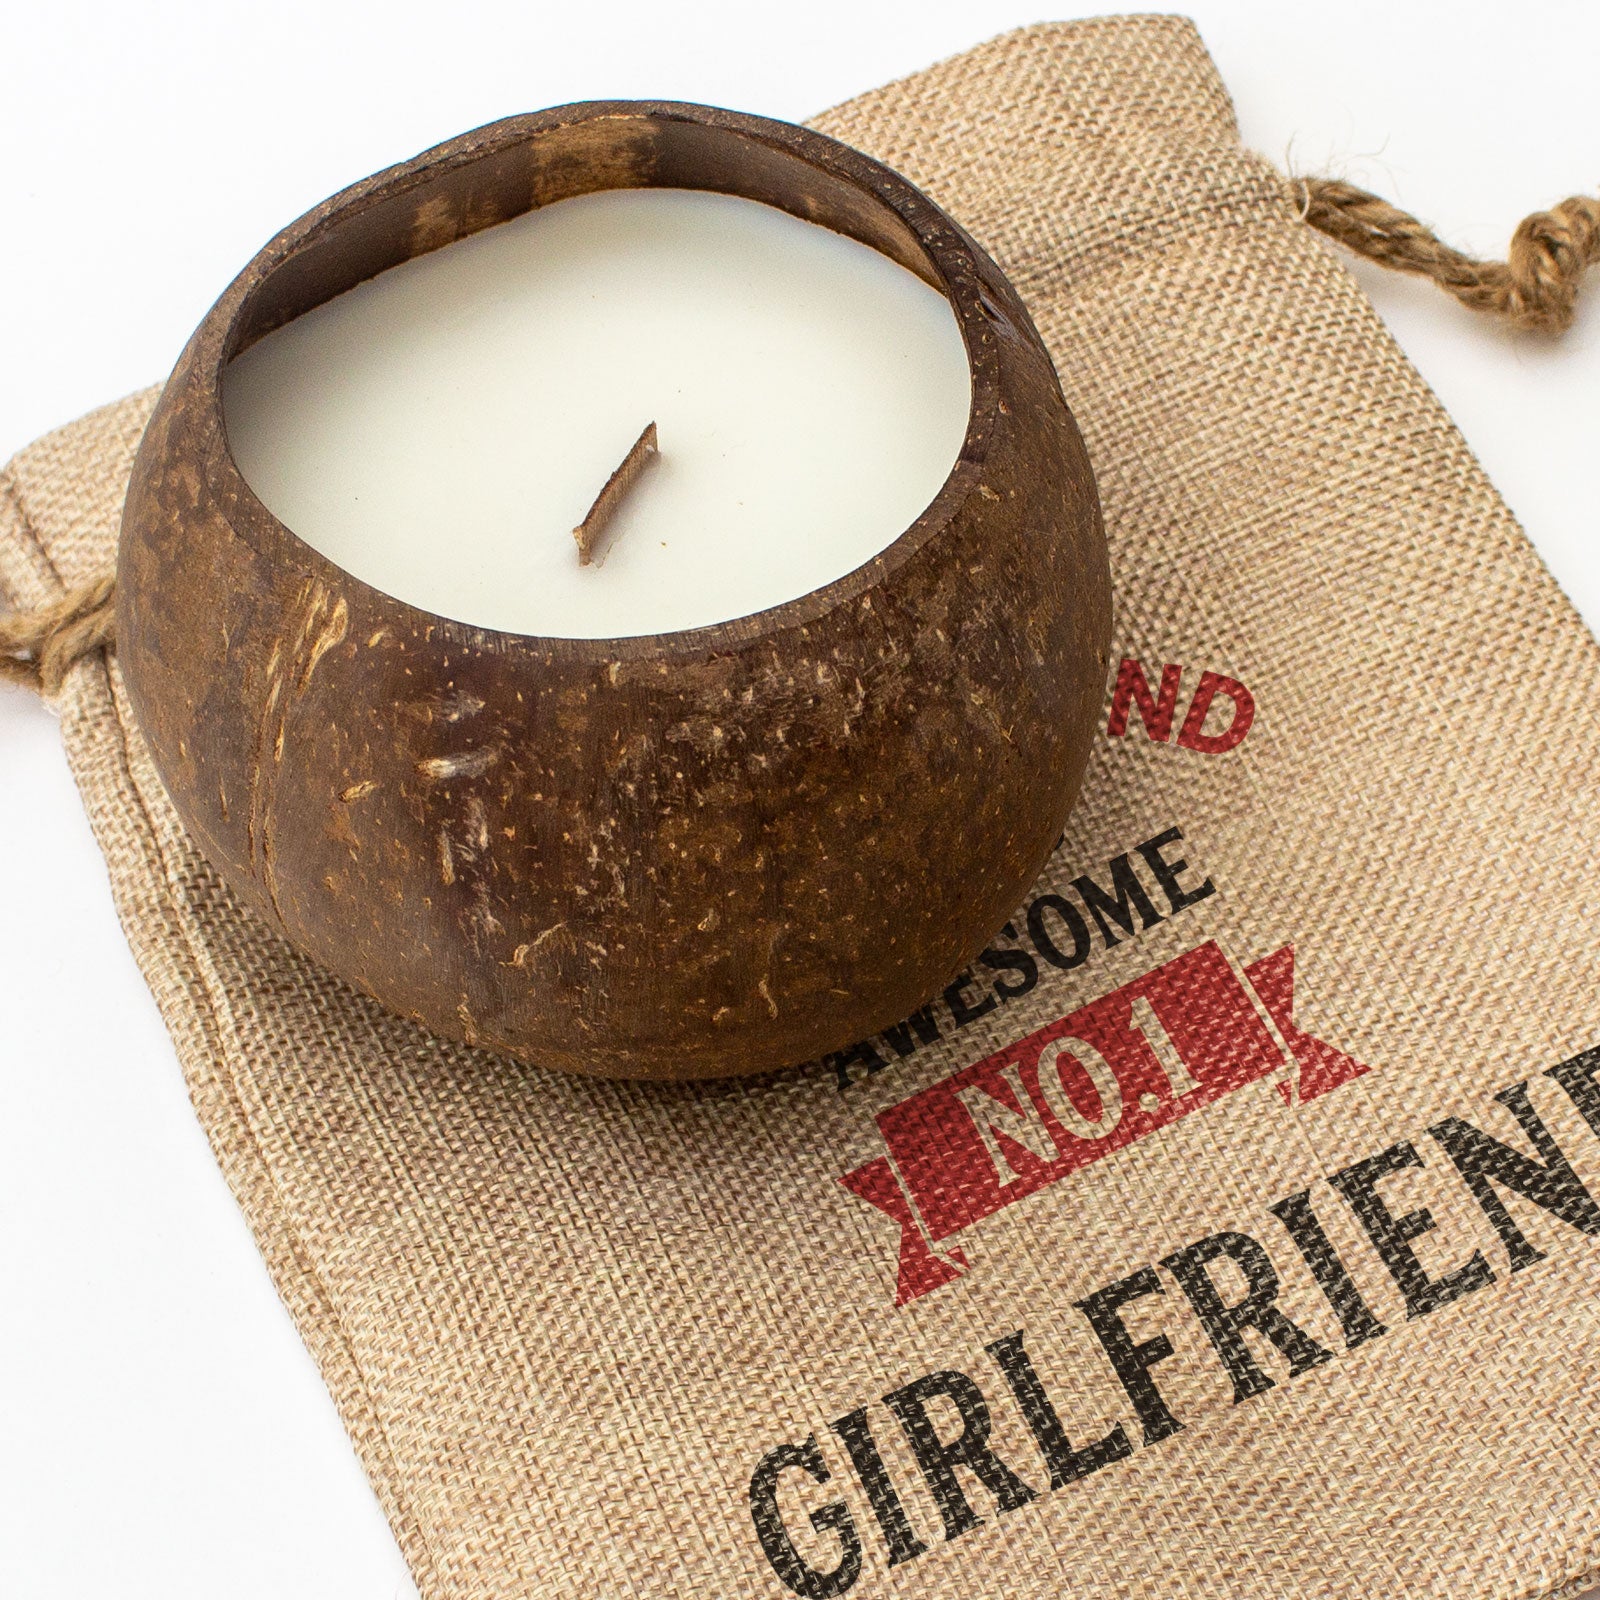 No.1 GIRLFRIEND - Toasted Coconut Bowl Candle – Soy Wax - Gift Present